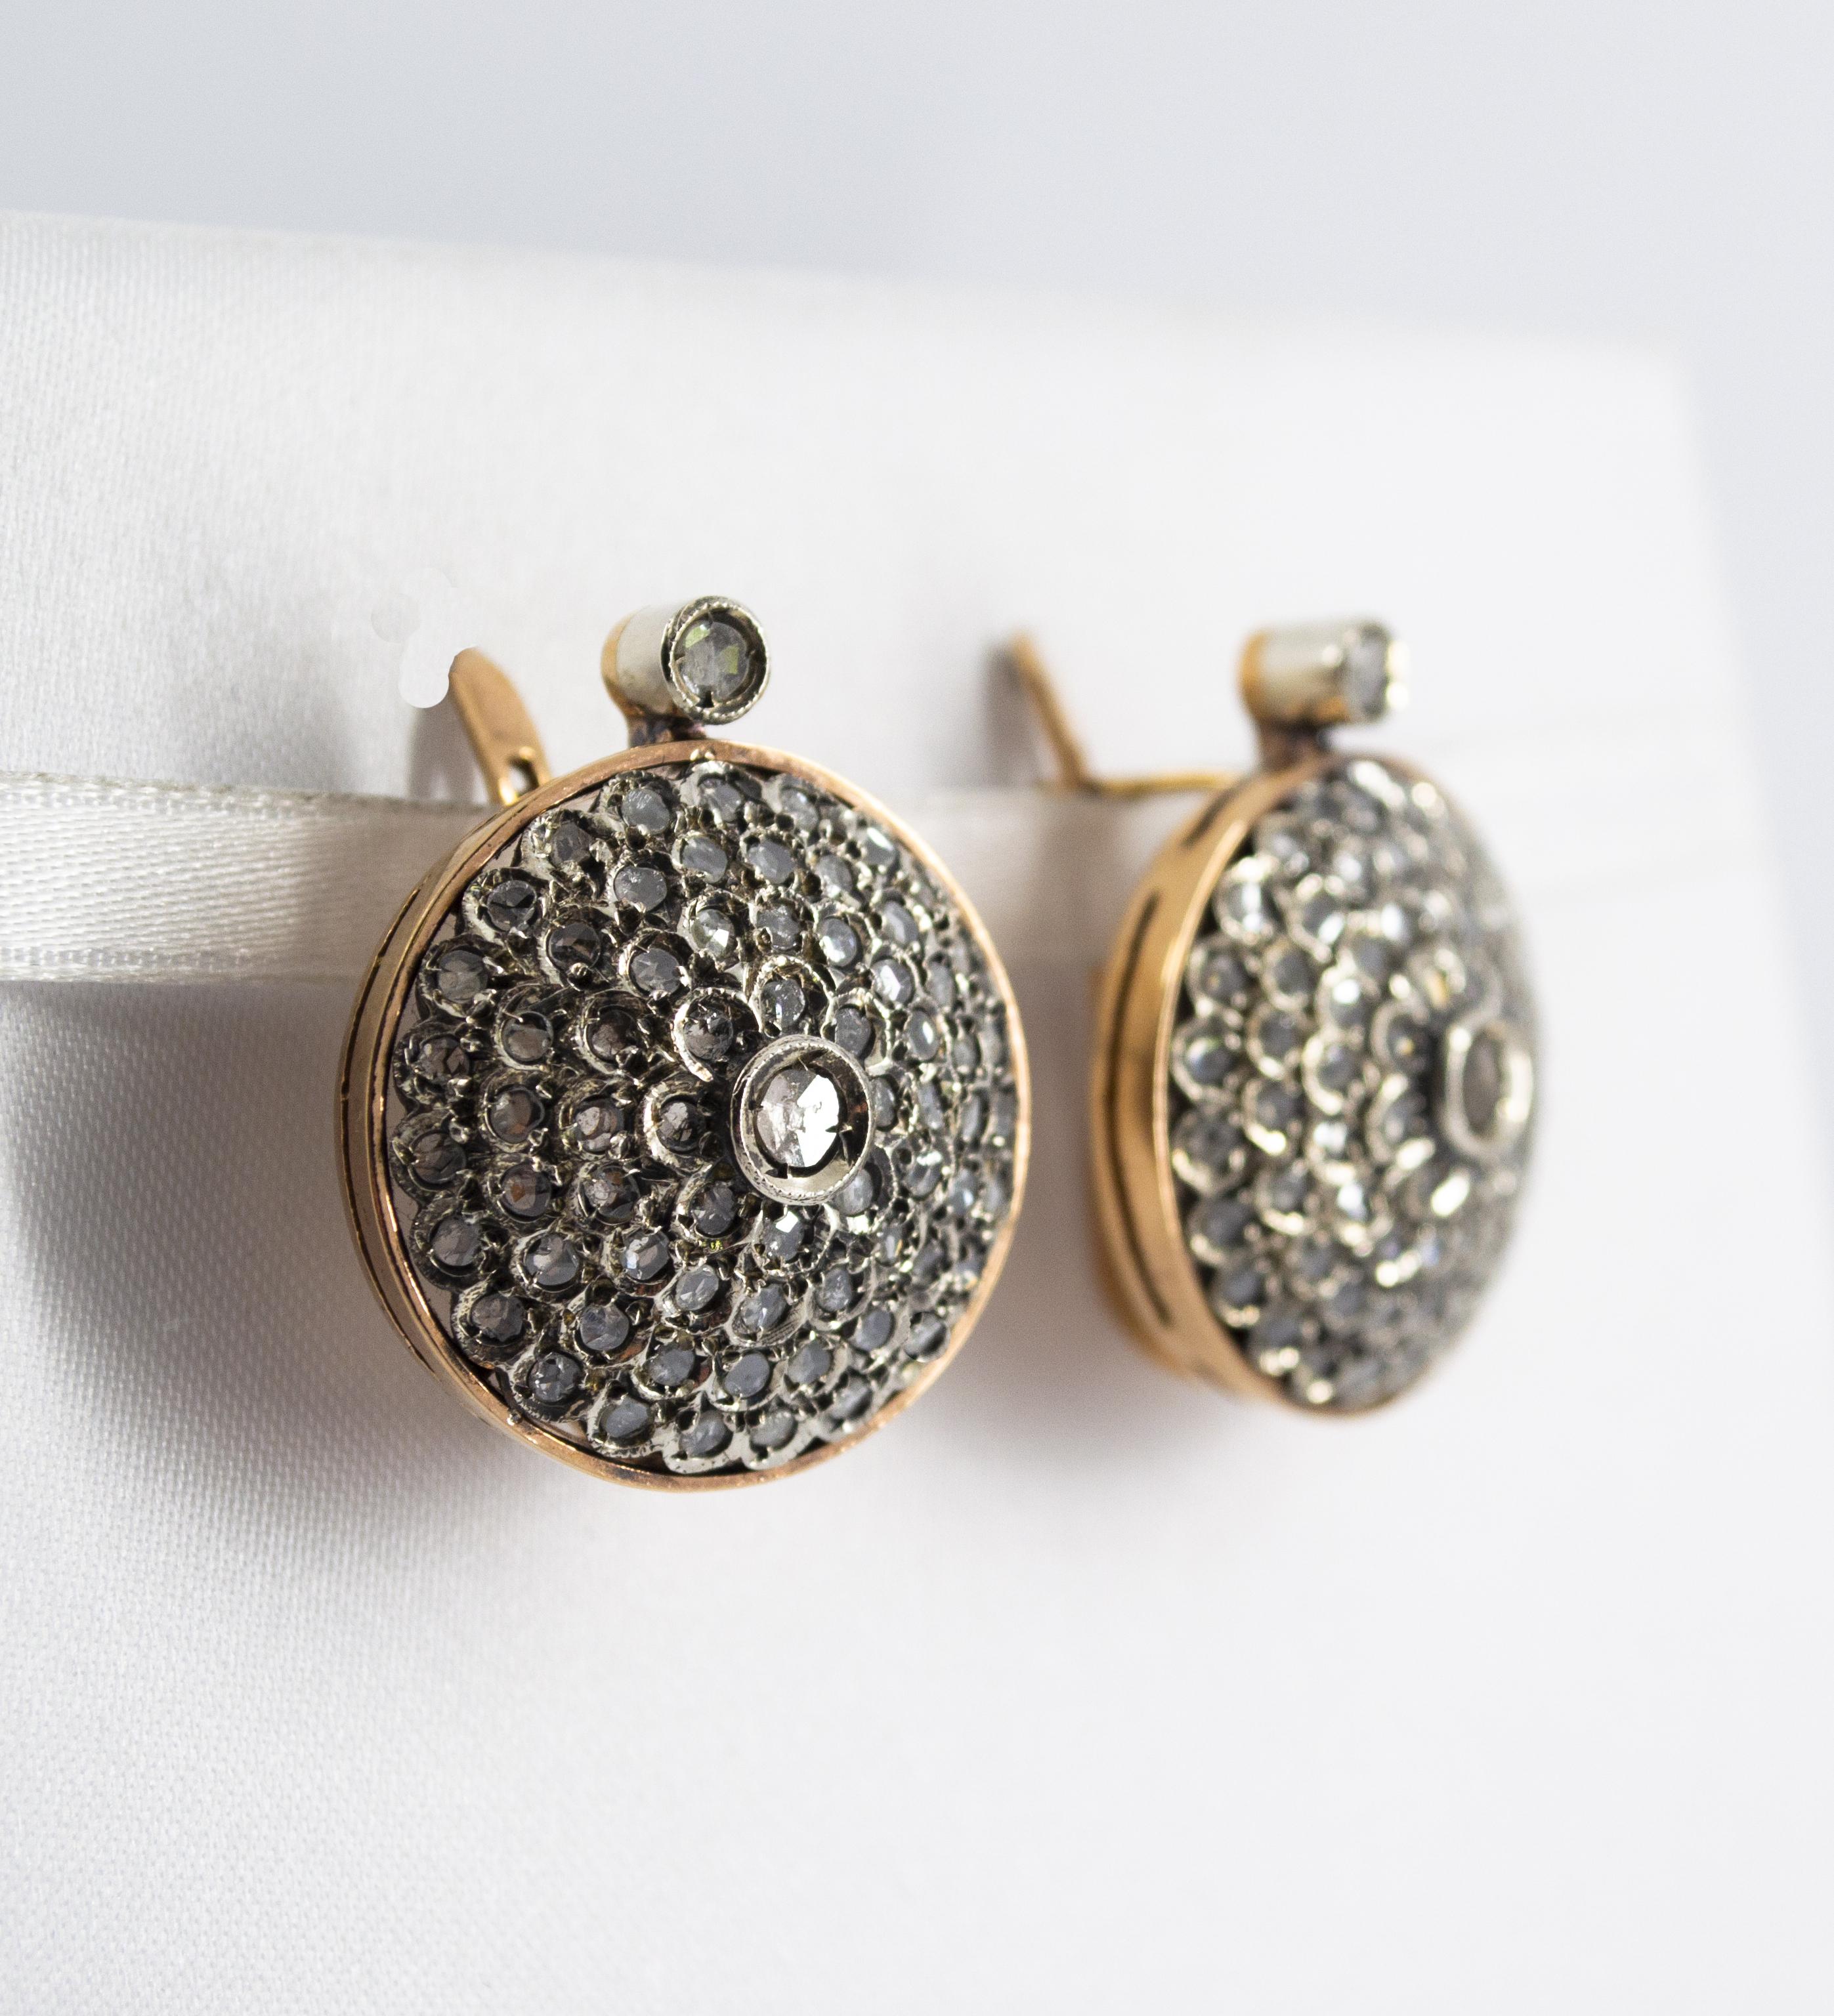 These Earrings are made of 9K Yellow Gold and Sterling Silver.
These Earrings have 2.00 Carats of Diamonds.
All our Earrings have pins for pierced ears but we can change the closure and make any of our Earrings suitable even for non-pierced